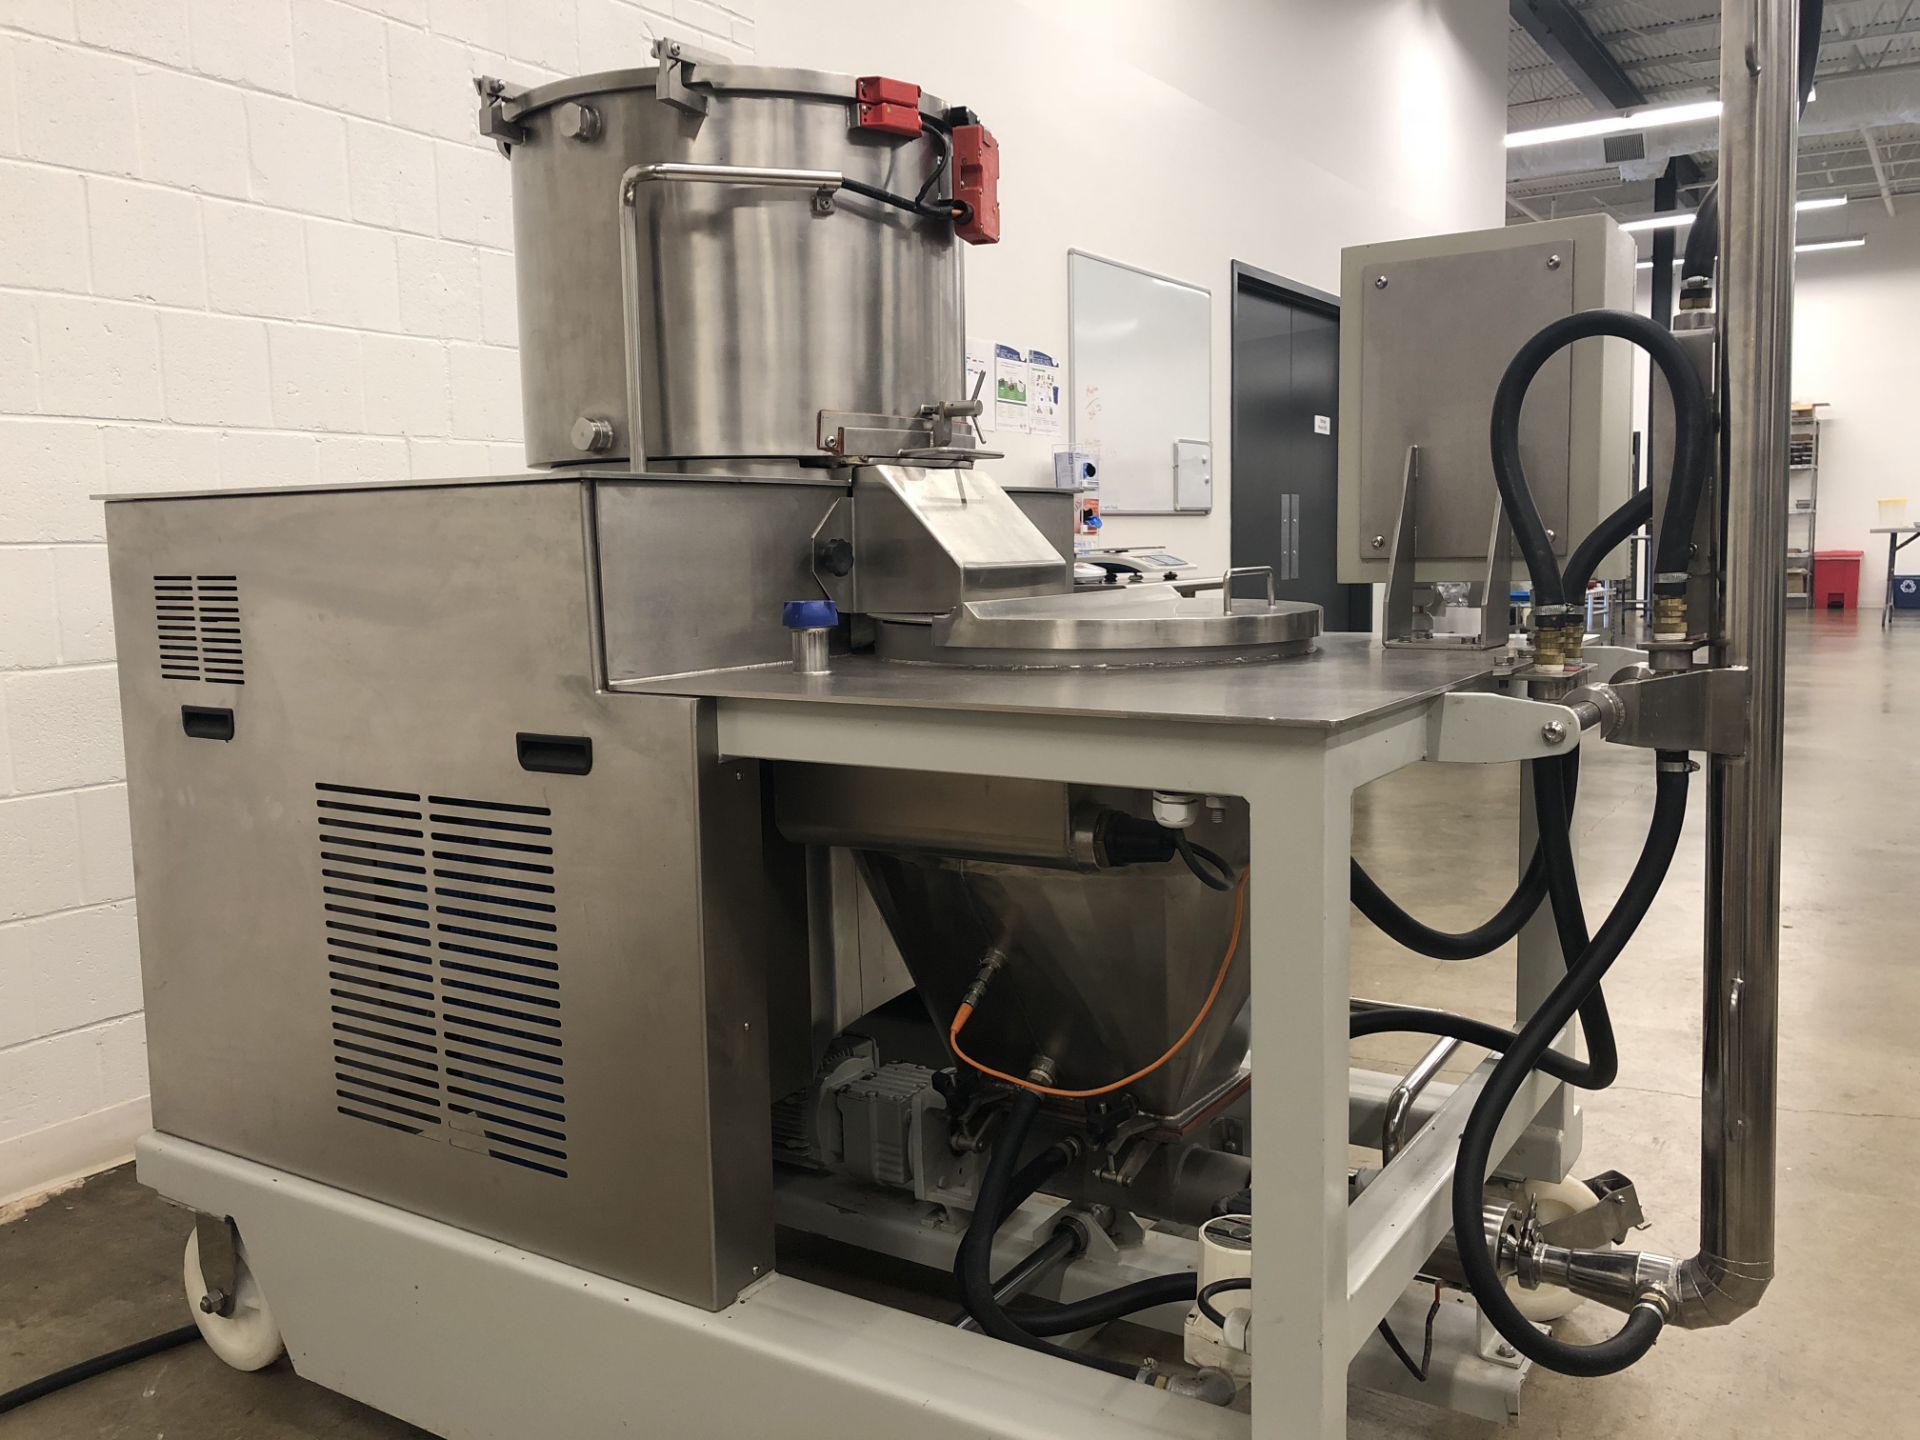 Jaf Inox 30 kg Batch Knife Mill, 3 phase, 220 volts, new 2015 - Image 6 of 6